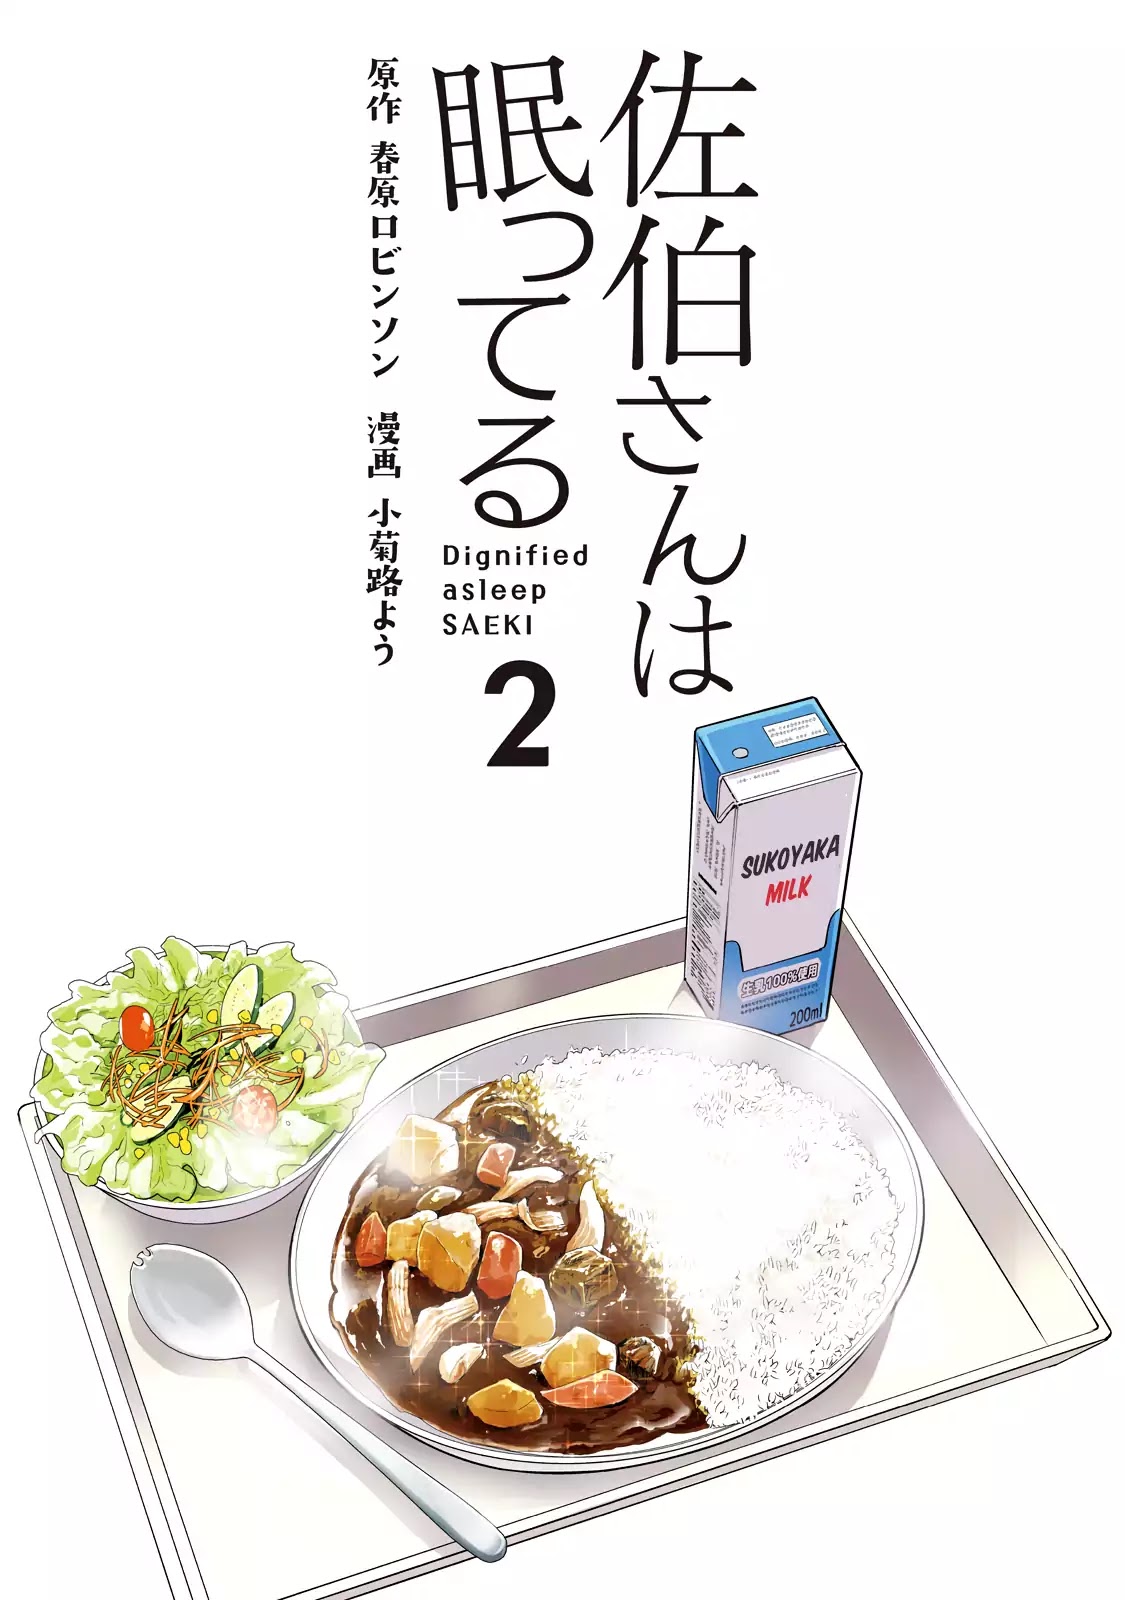 Dignified asleep SAEKI Chapter 9: Lunch Of Resolve